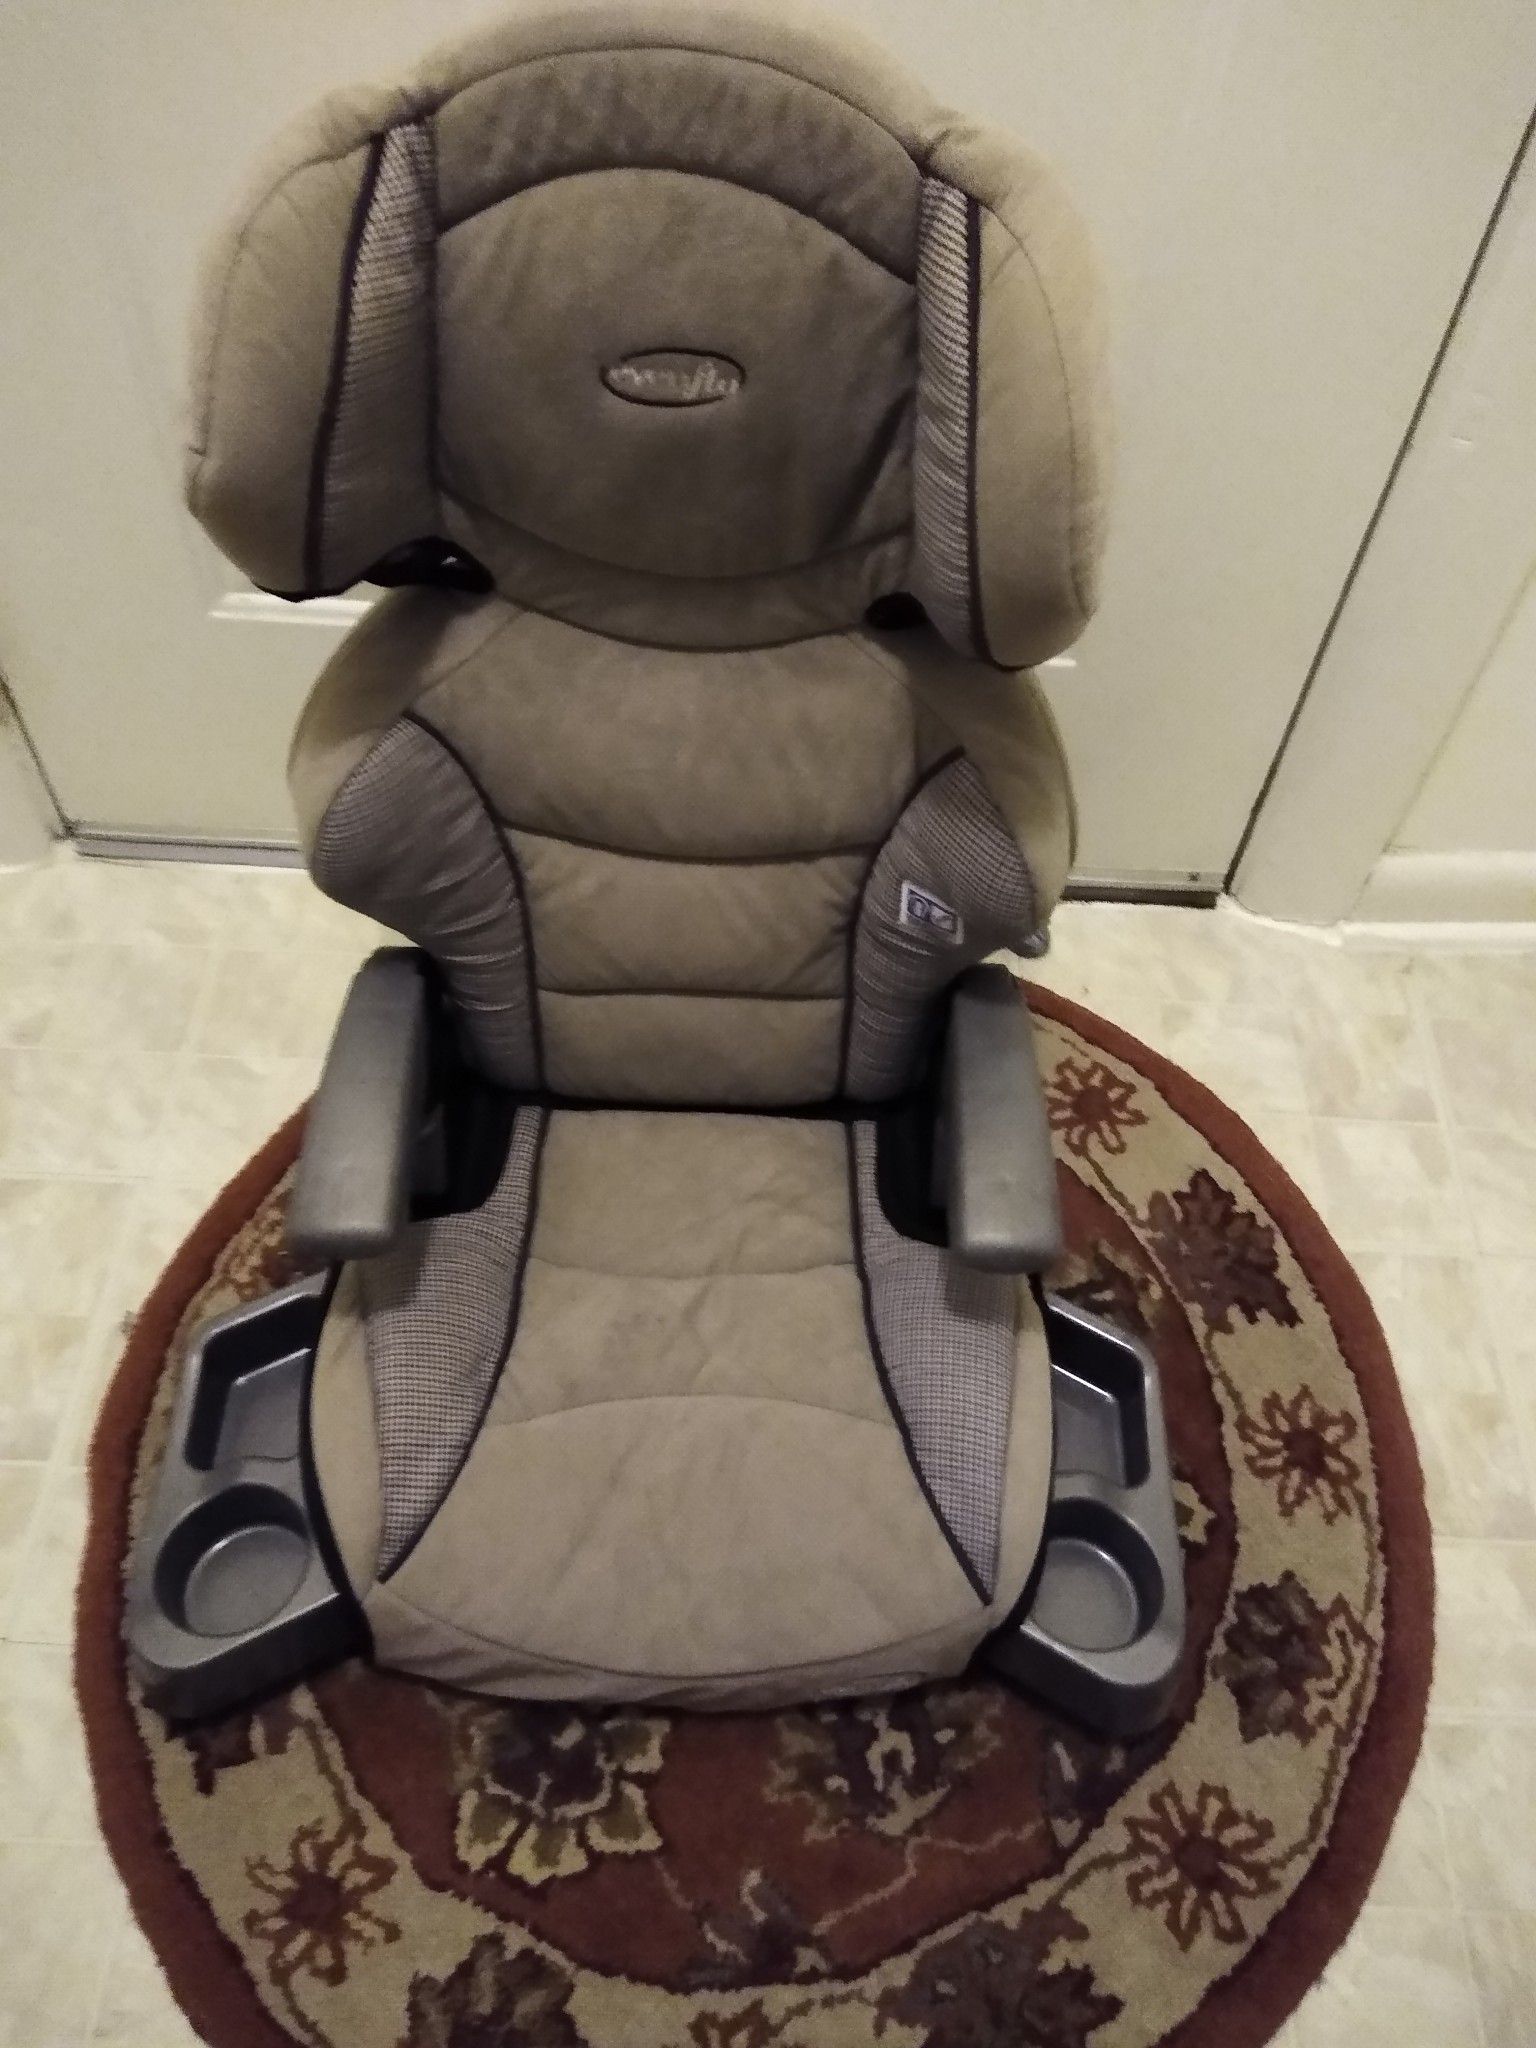 Use booster seat little wear and tear but other than that is fine $20 or offer